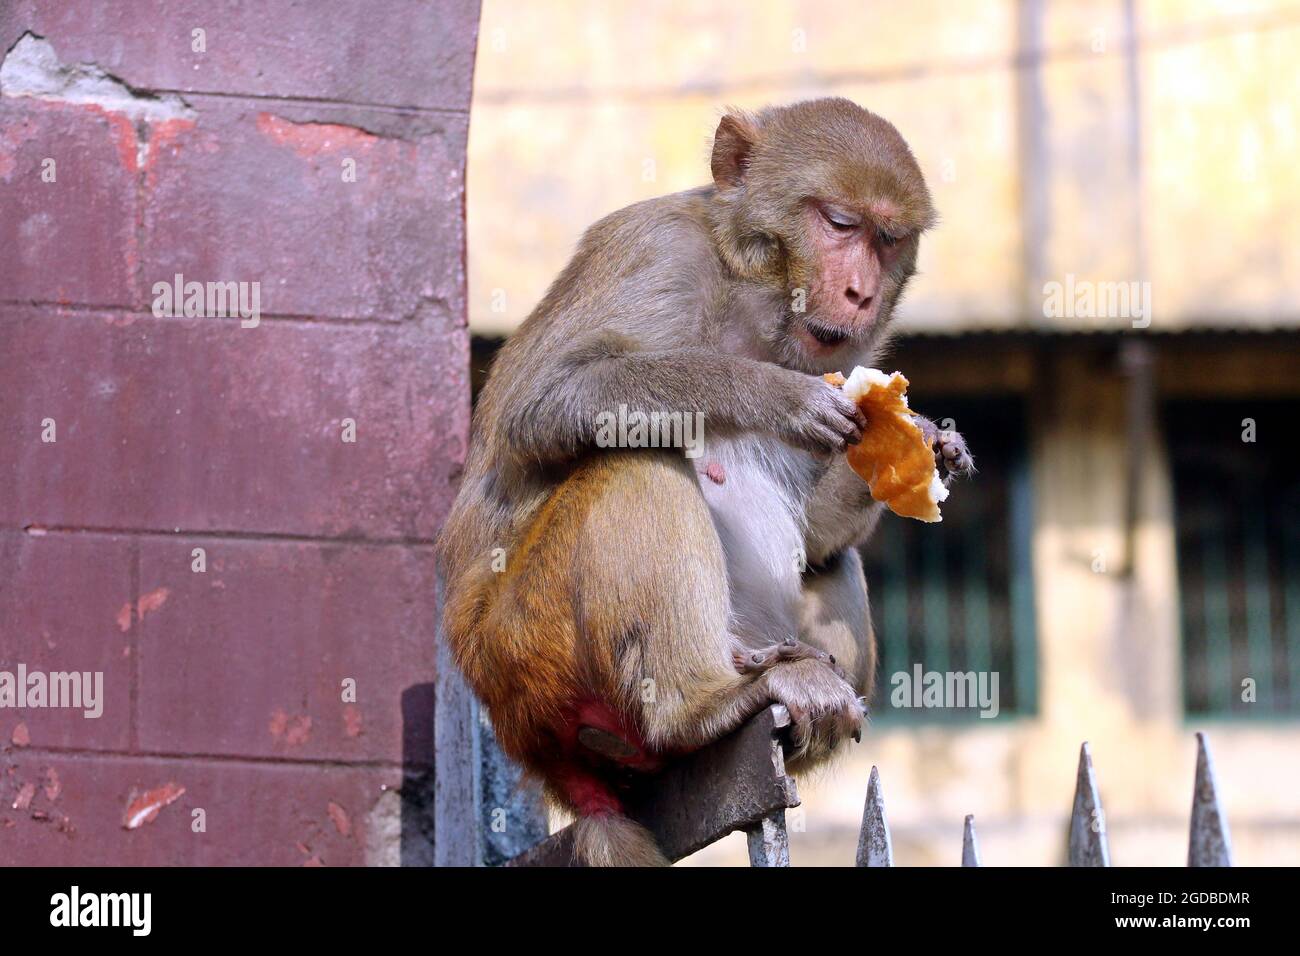 Dhaka, Bangladesh. 12th Aug, 2021. Dhaka, Bangladesh, August 12, 2021: Japanese macaques are seen on the fences of the houses of Gandaria neighborhood looking for tourist to receive food amid Covid-19 pandemic. The Japanese macaque or red-faced macaque is a species of primate, that lives in forests and mountains, that have migrated to cities and live with humans in looking for food. Credit: Habibur Rahman/Eyepix Group/Alamy Live News Credit: Eyepix Group/Alamy Live News Stock Photo